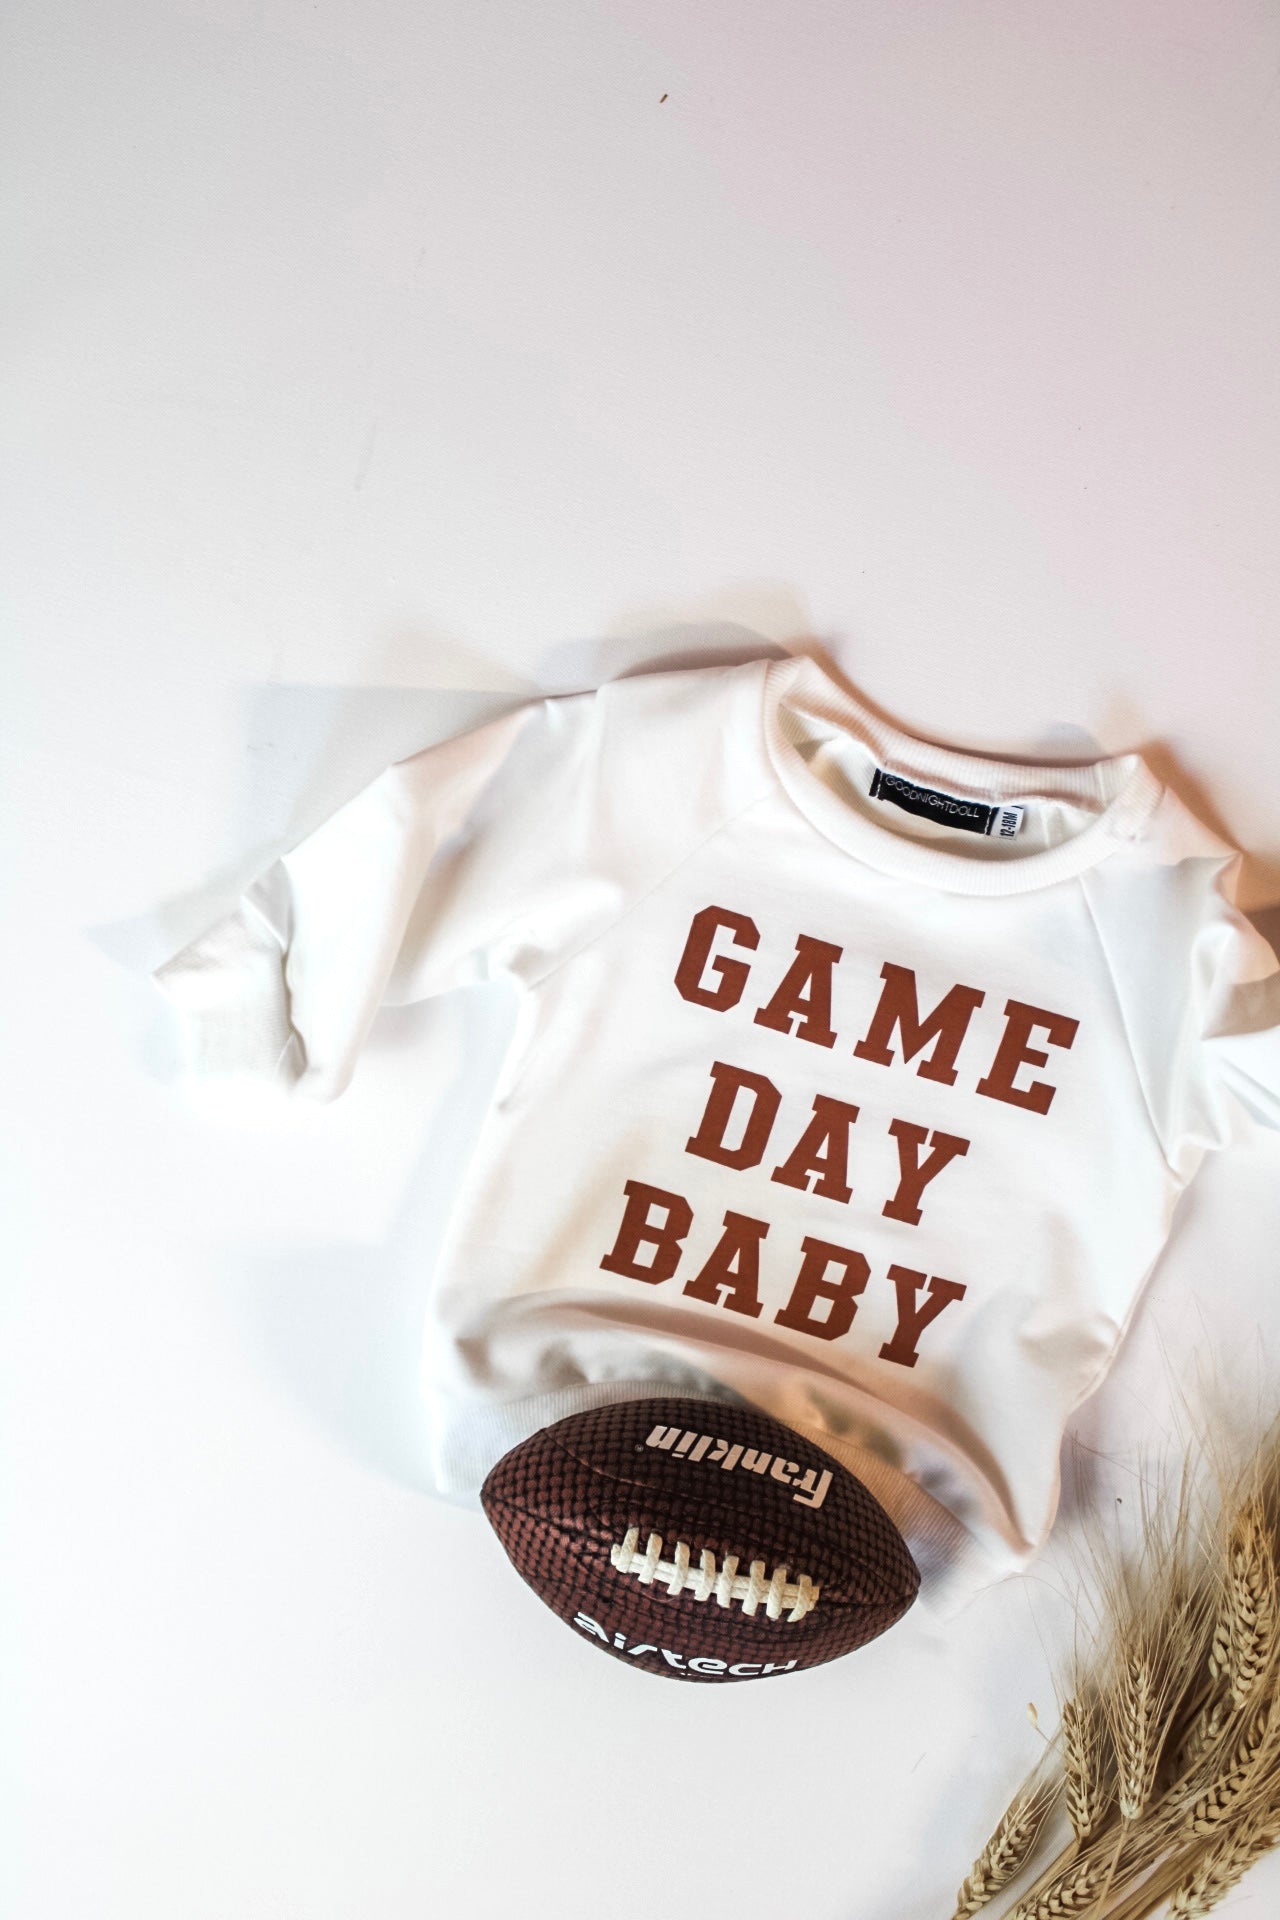 Gameday baby sweater